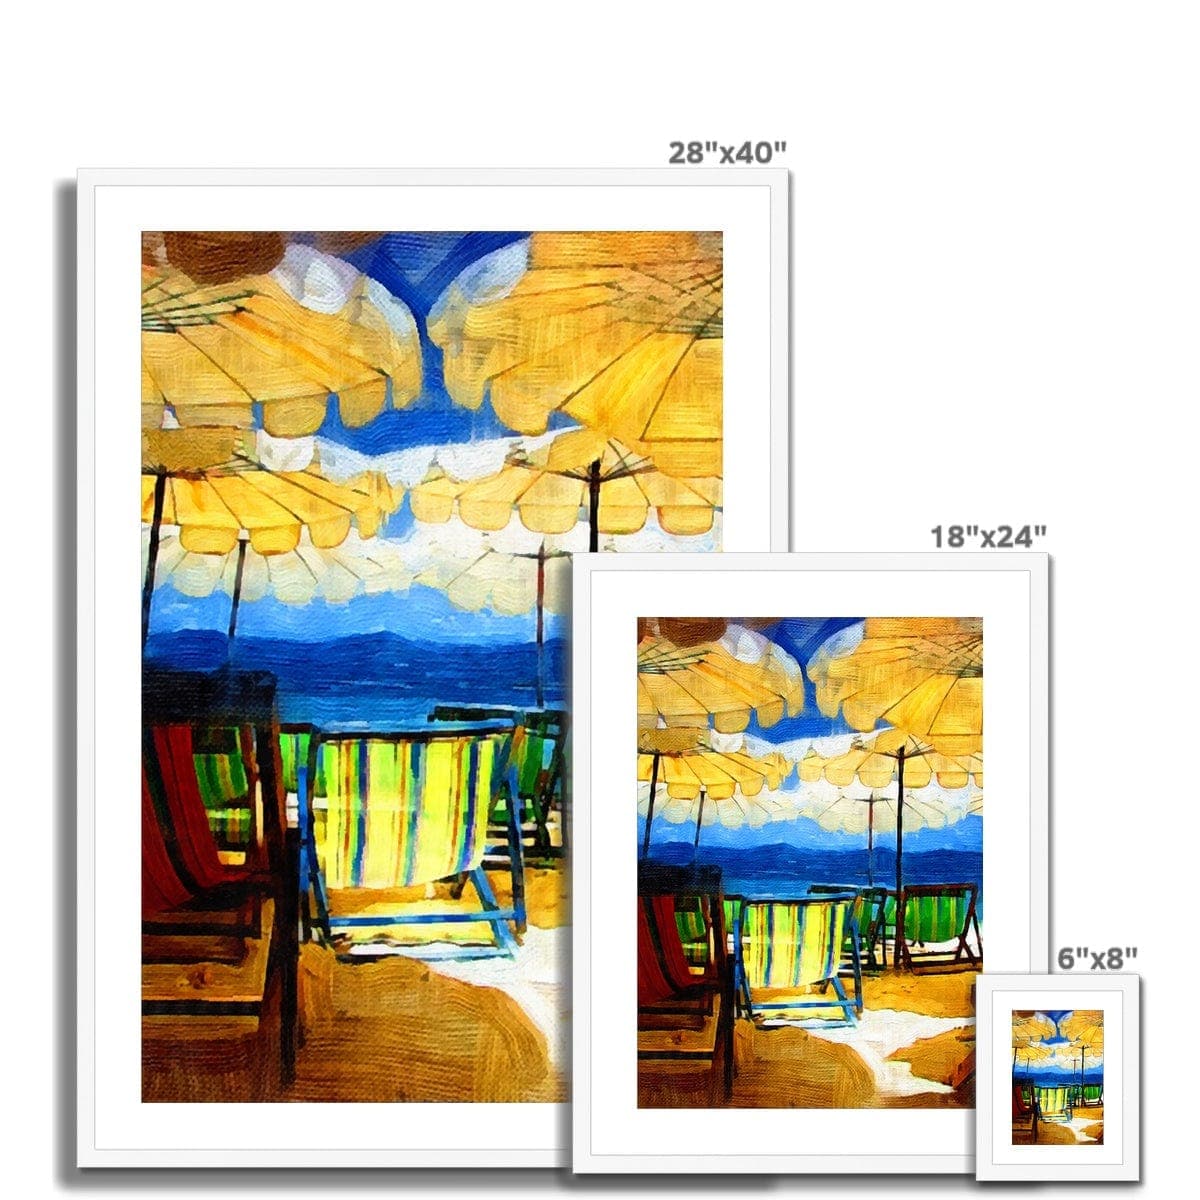 Sunny Day on the Beach Framed & Mounted Print